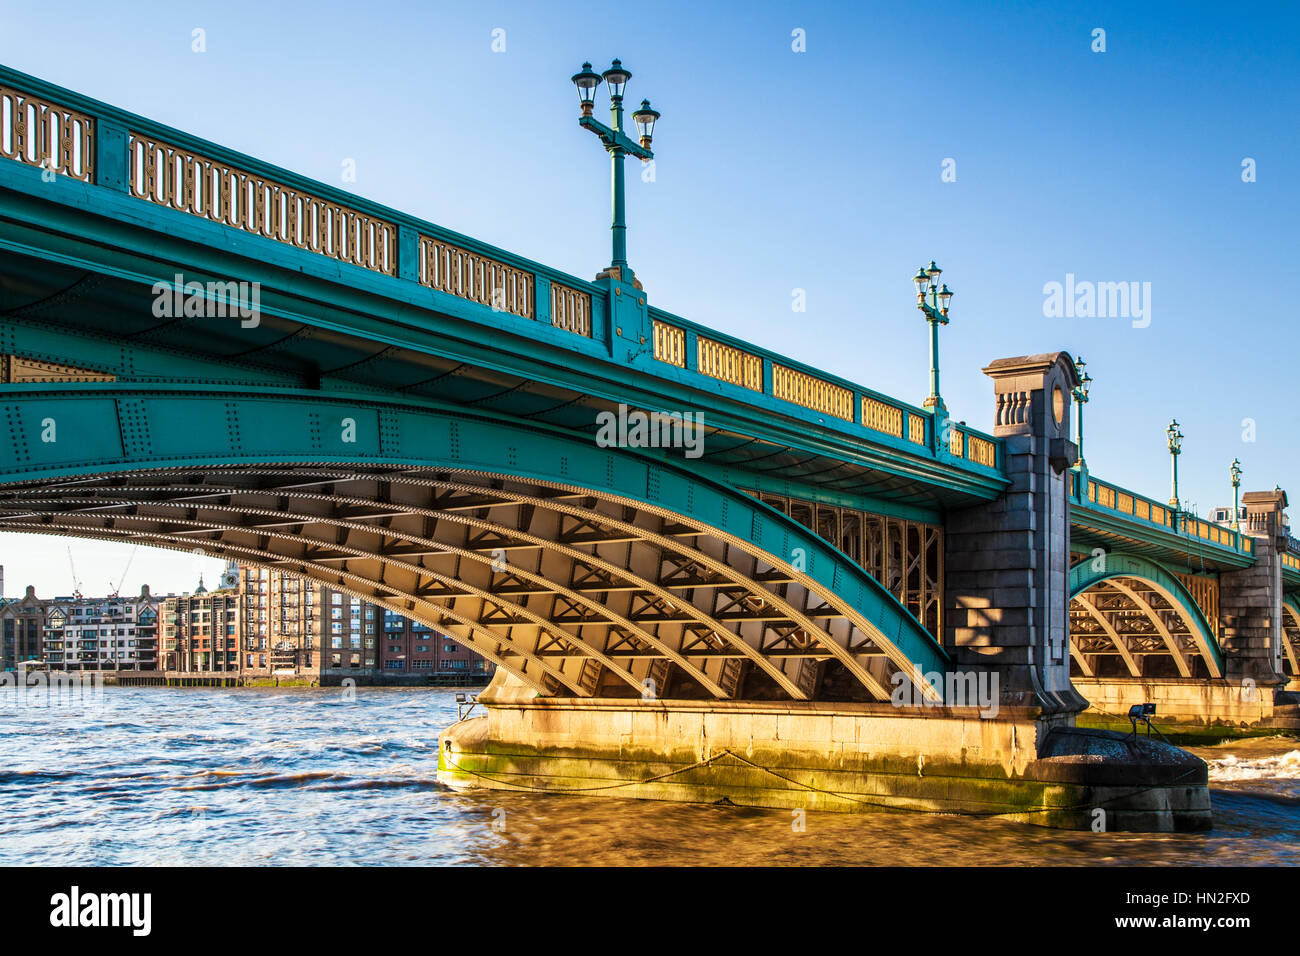 Evening on the River Thames at Southwark Bridge in London. Stock Photo